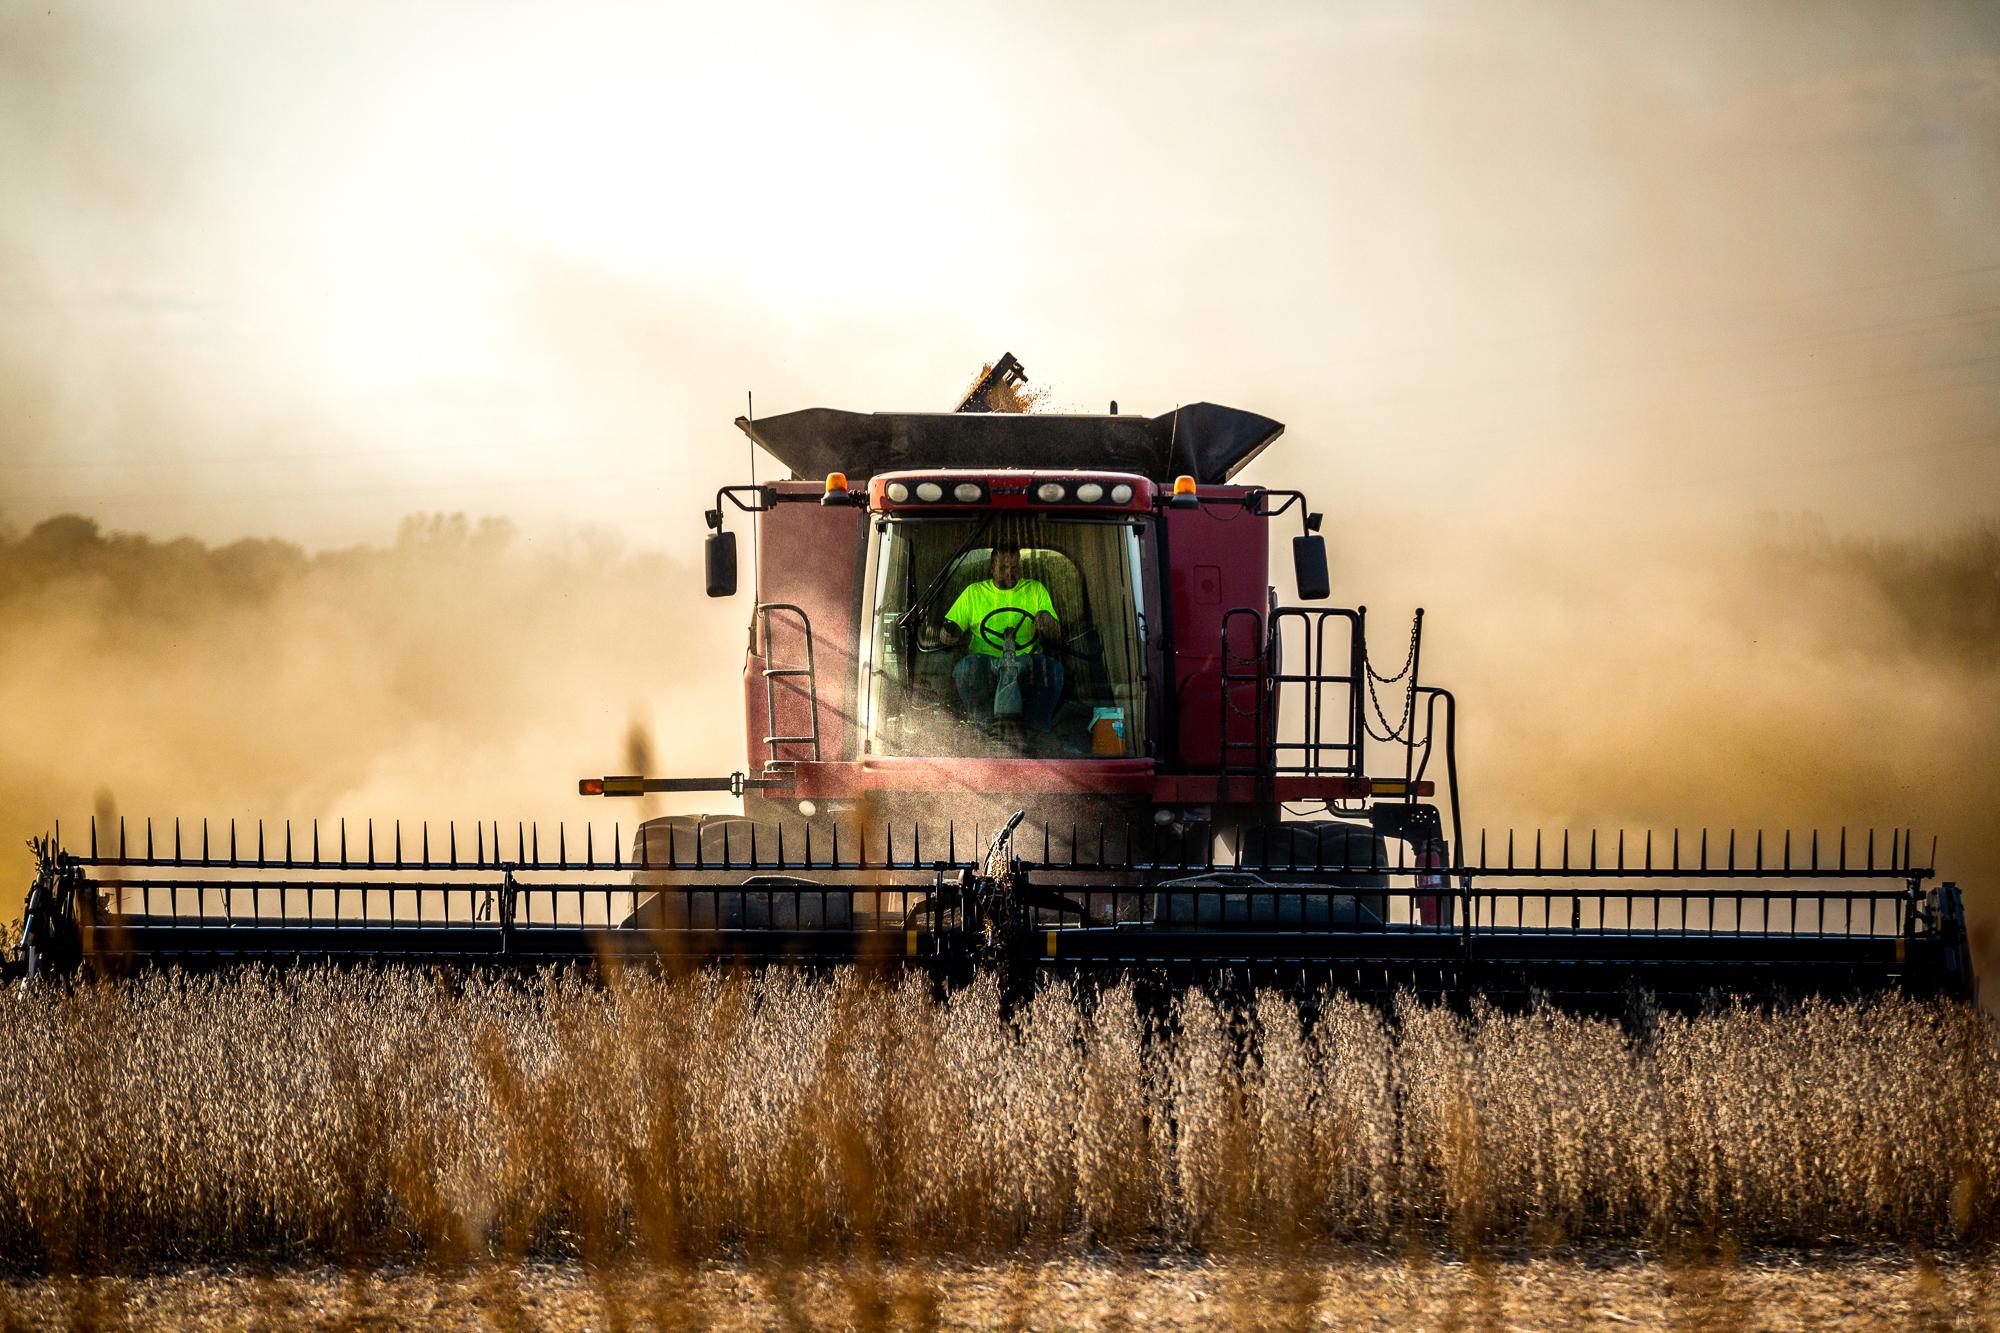 A combine harvests the last row of soybeans on Tuesday, November 9, 2021 in a field near Interstate 63. As fall wears on soybean harvesting season is nearing its end.